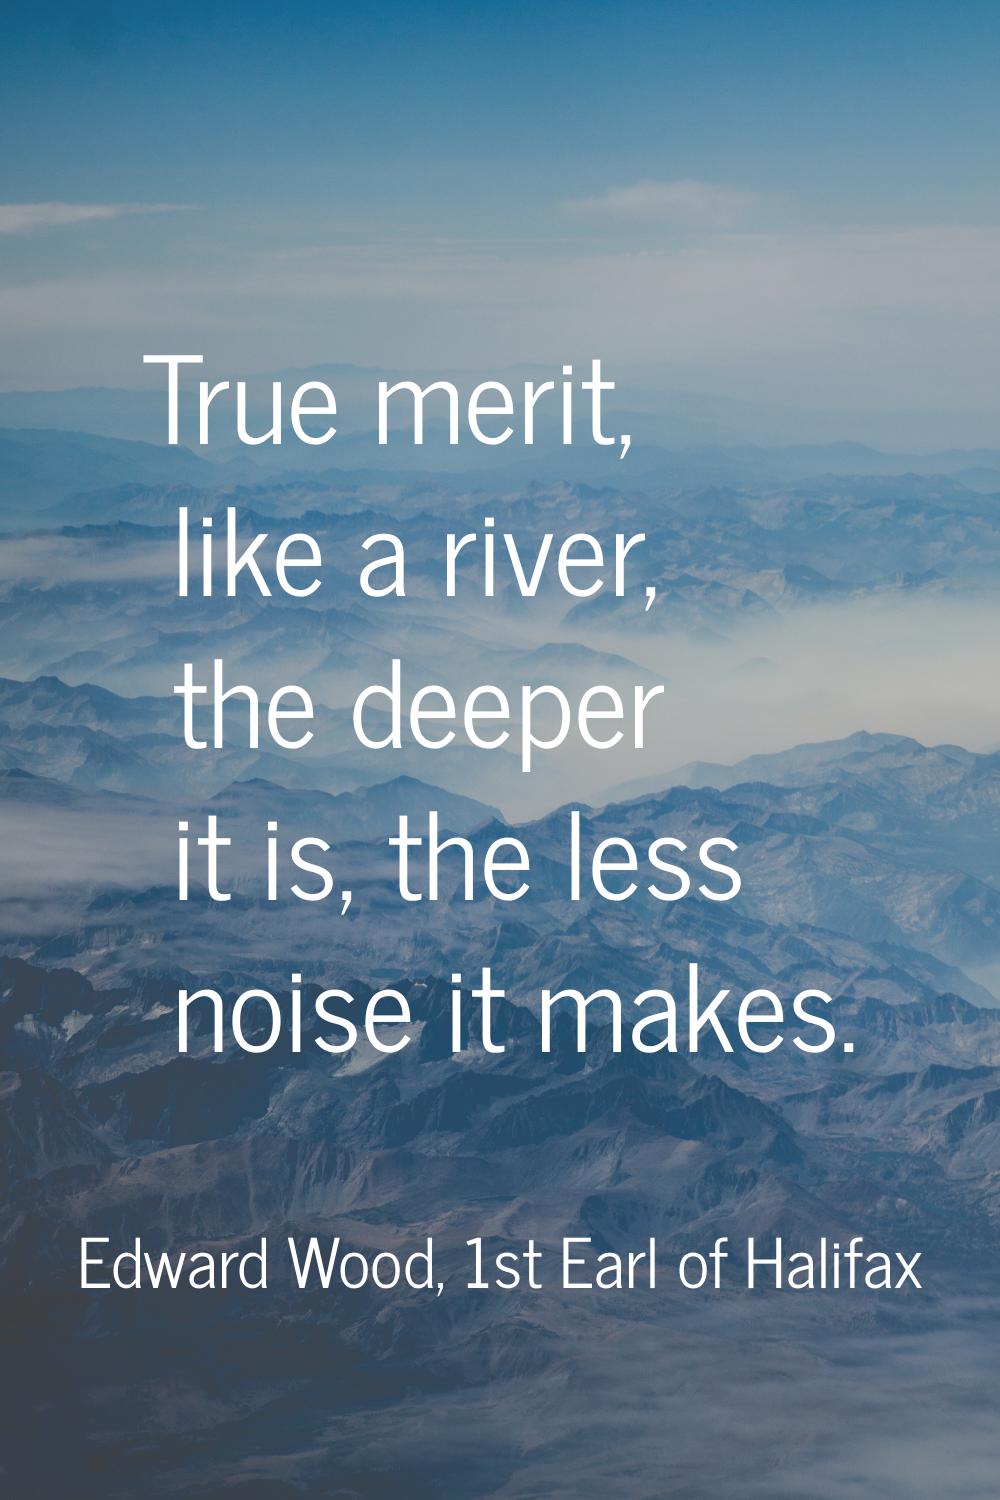 True merit, like a river, the deeper it is, the less noise it makes.